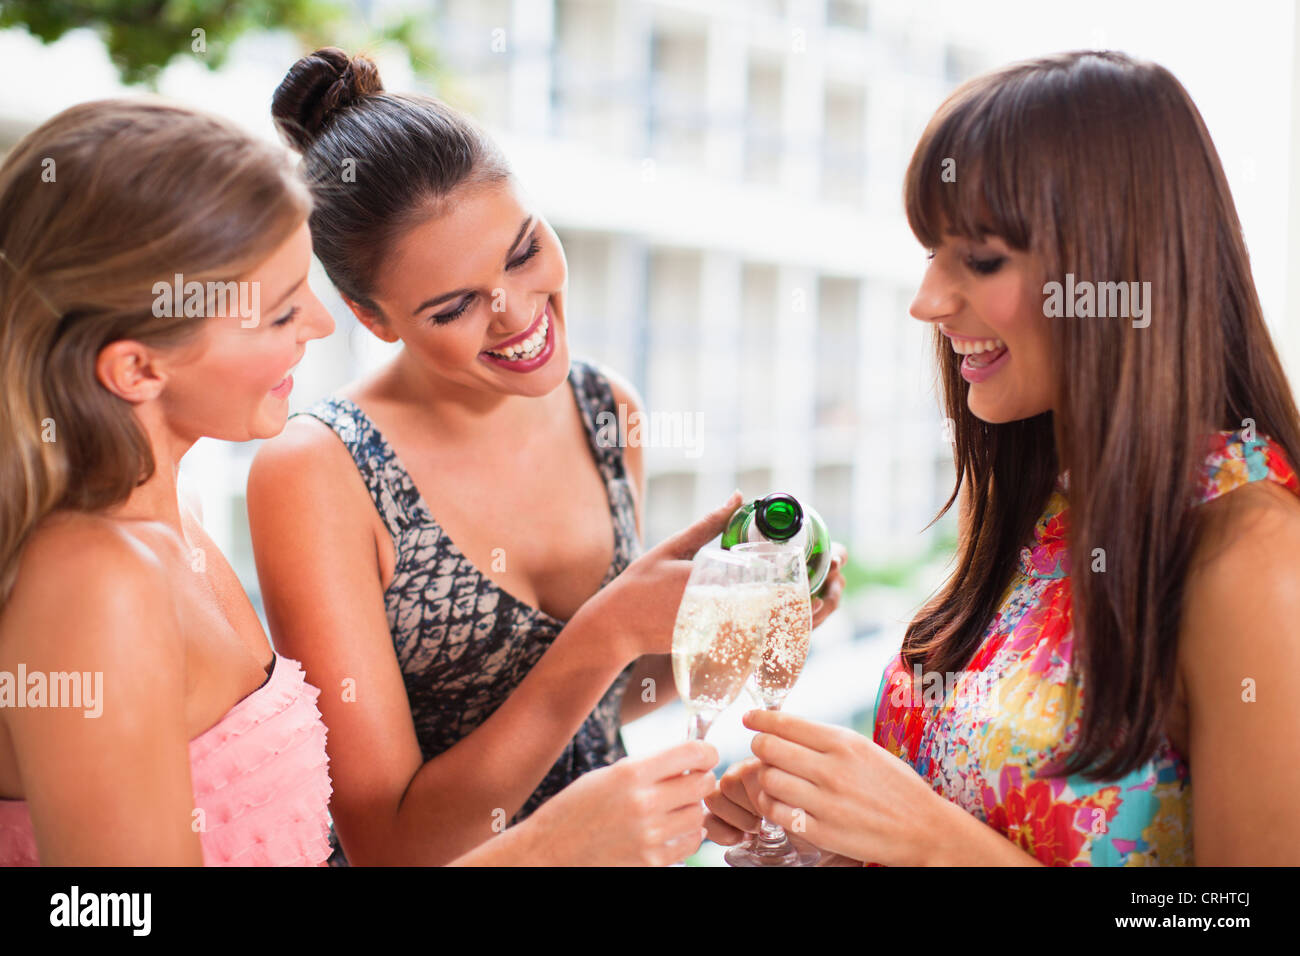 Women drinking champagne together Stock Photo